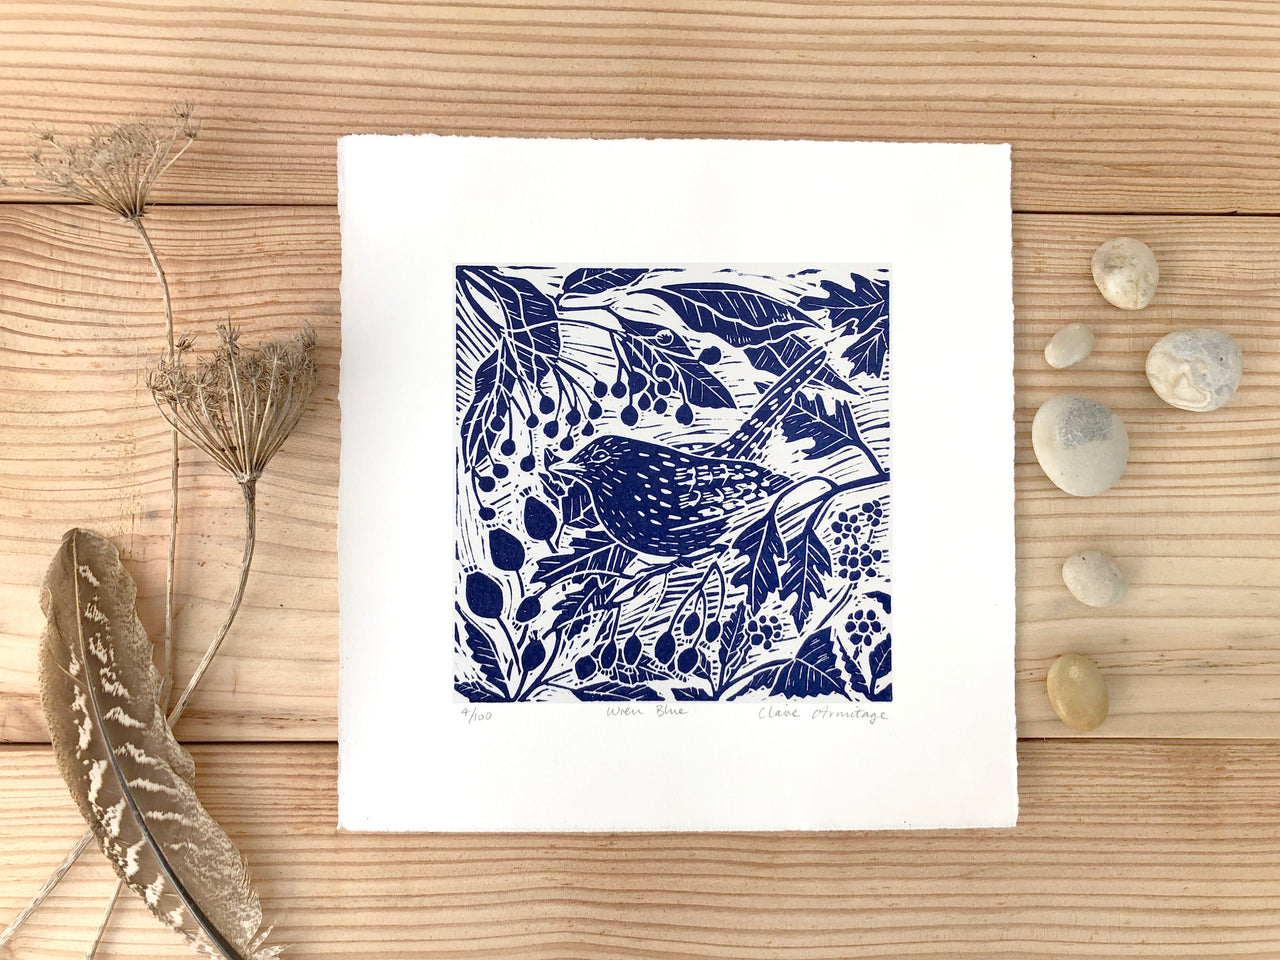 Wren limited edition lino print by Claire Armitage